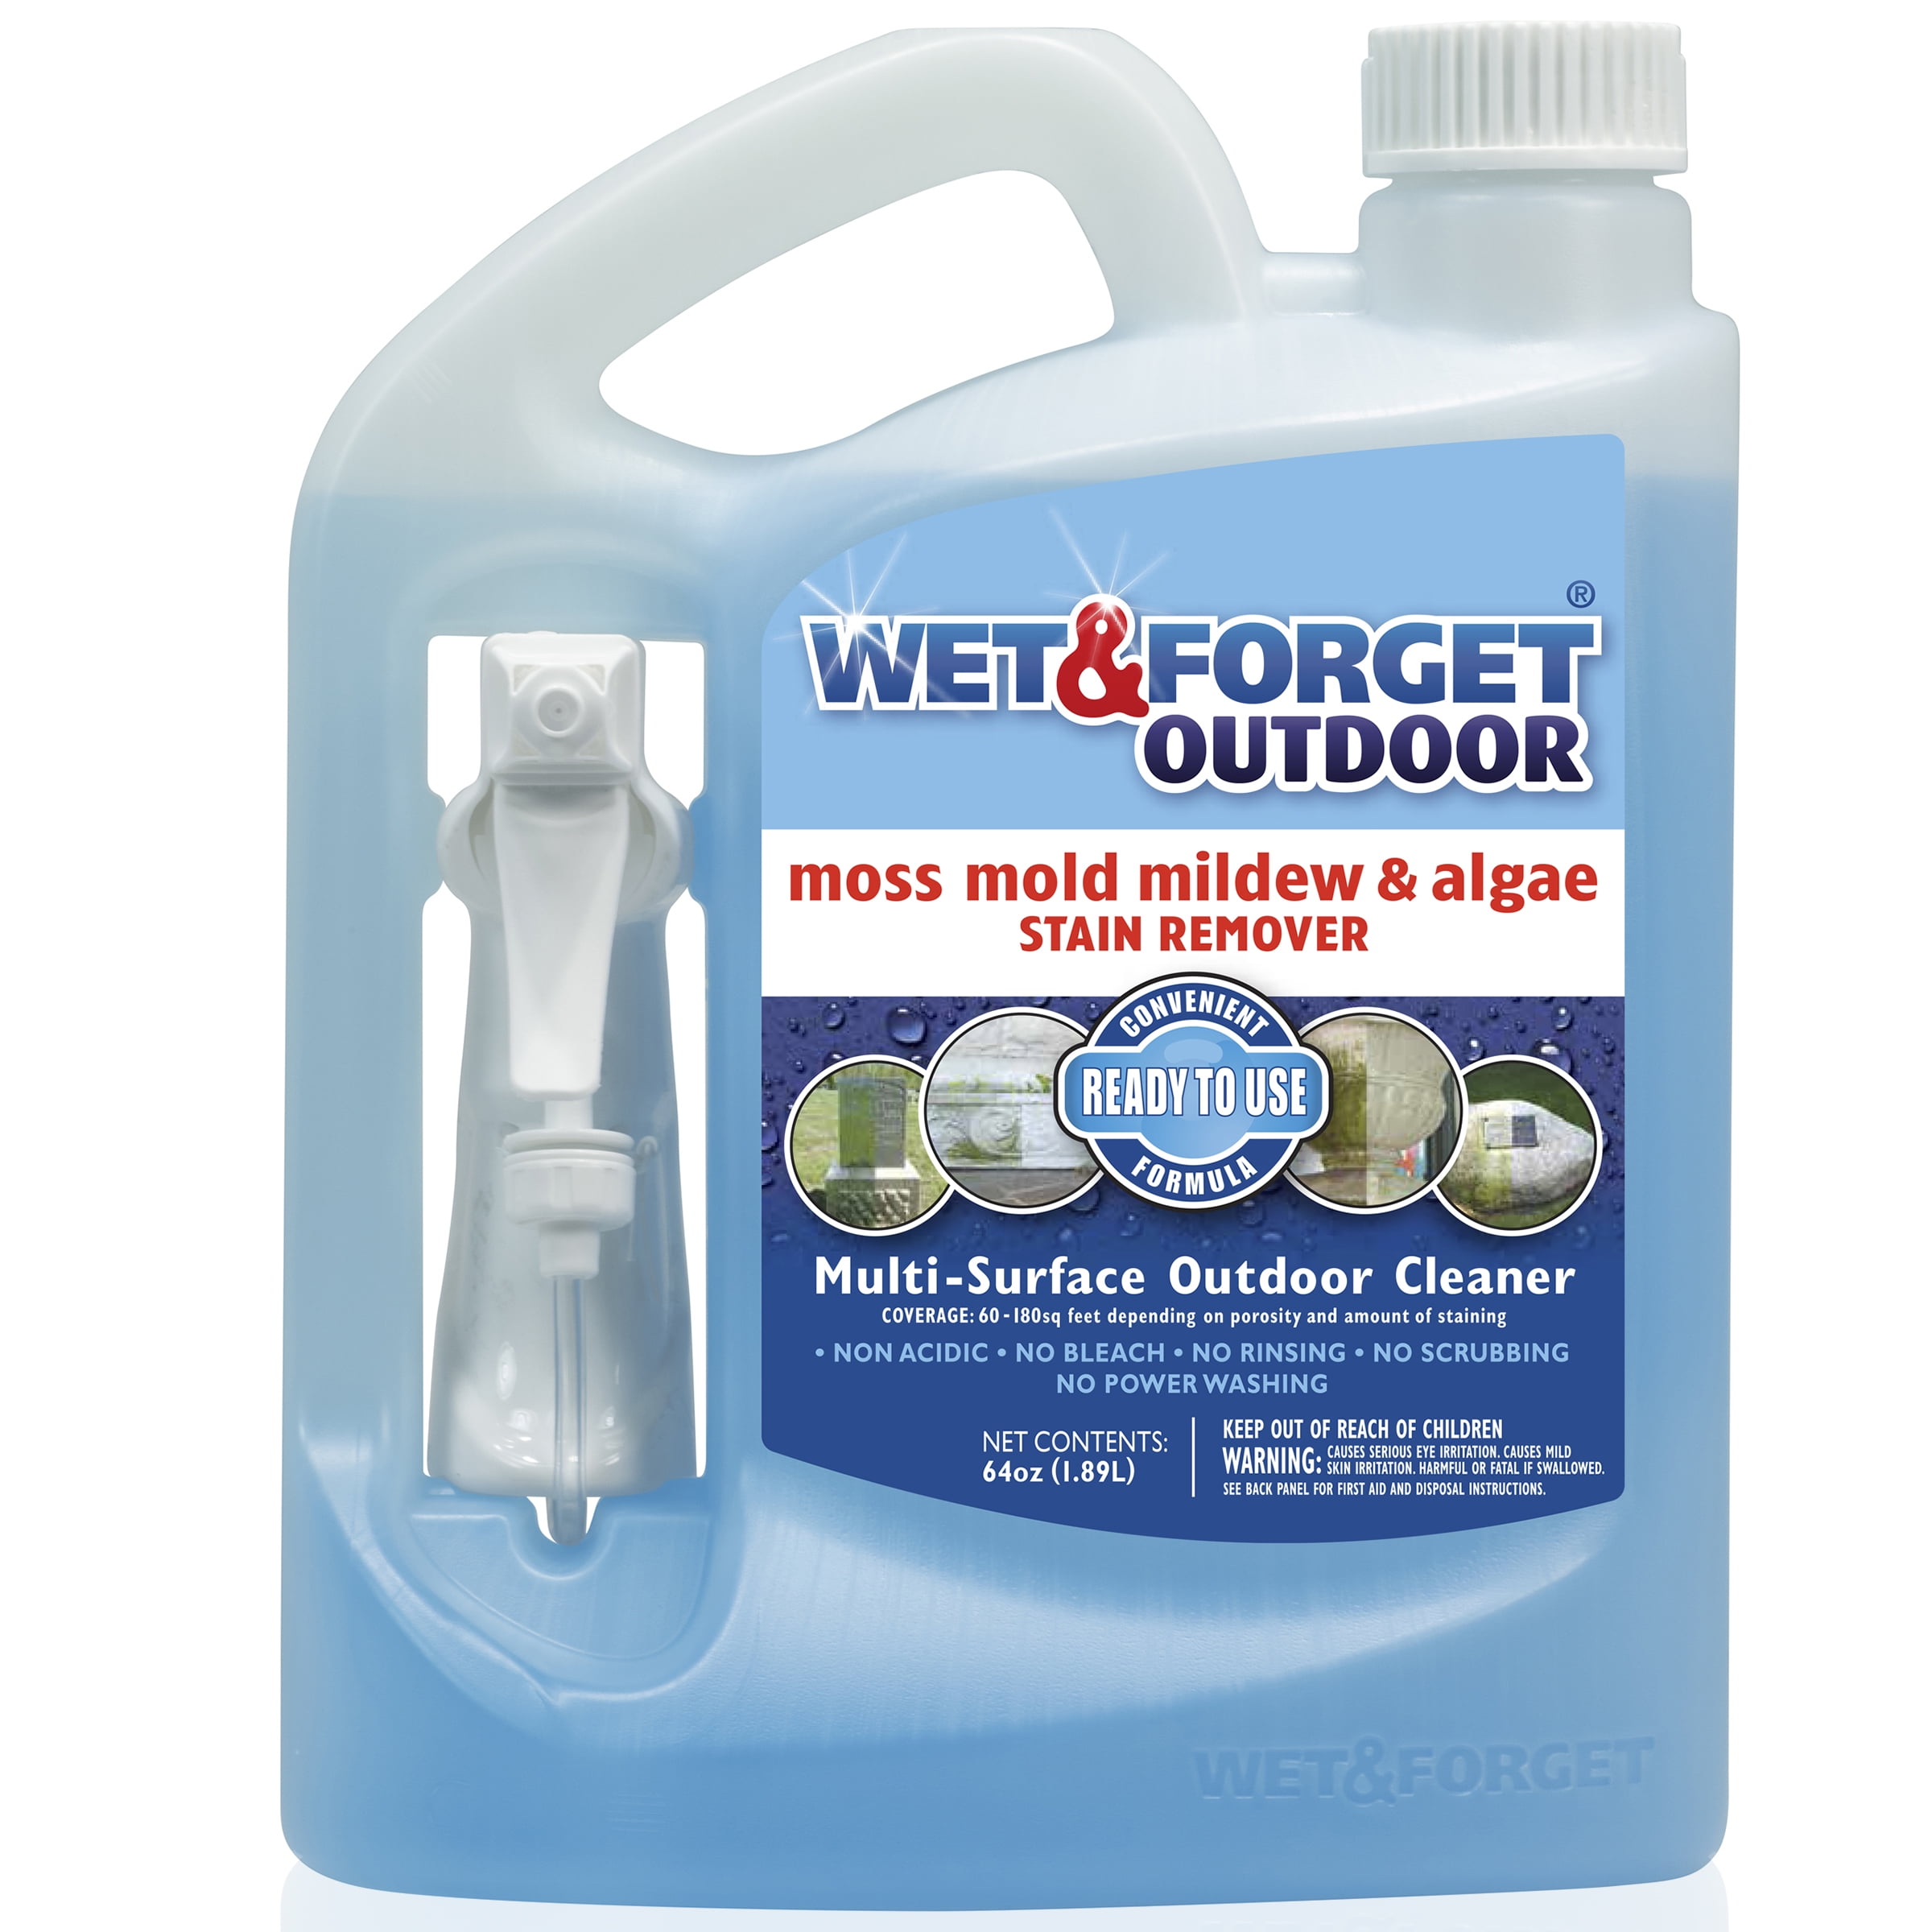 Wet and Forget Moss, Mold, Mildew and Algae Stain Remover Hose End, 48oz -  Esbenshades